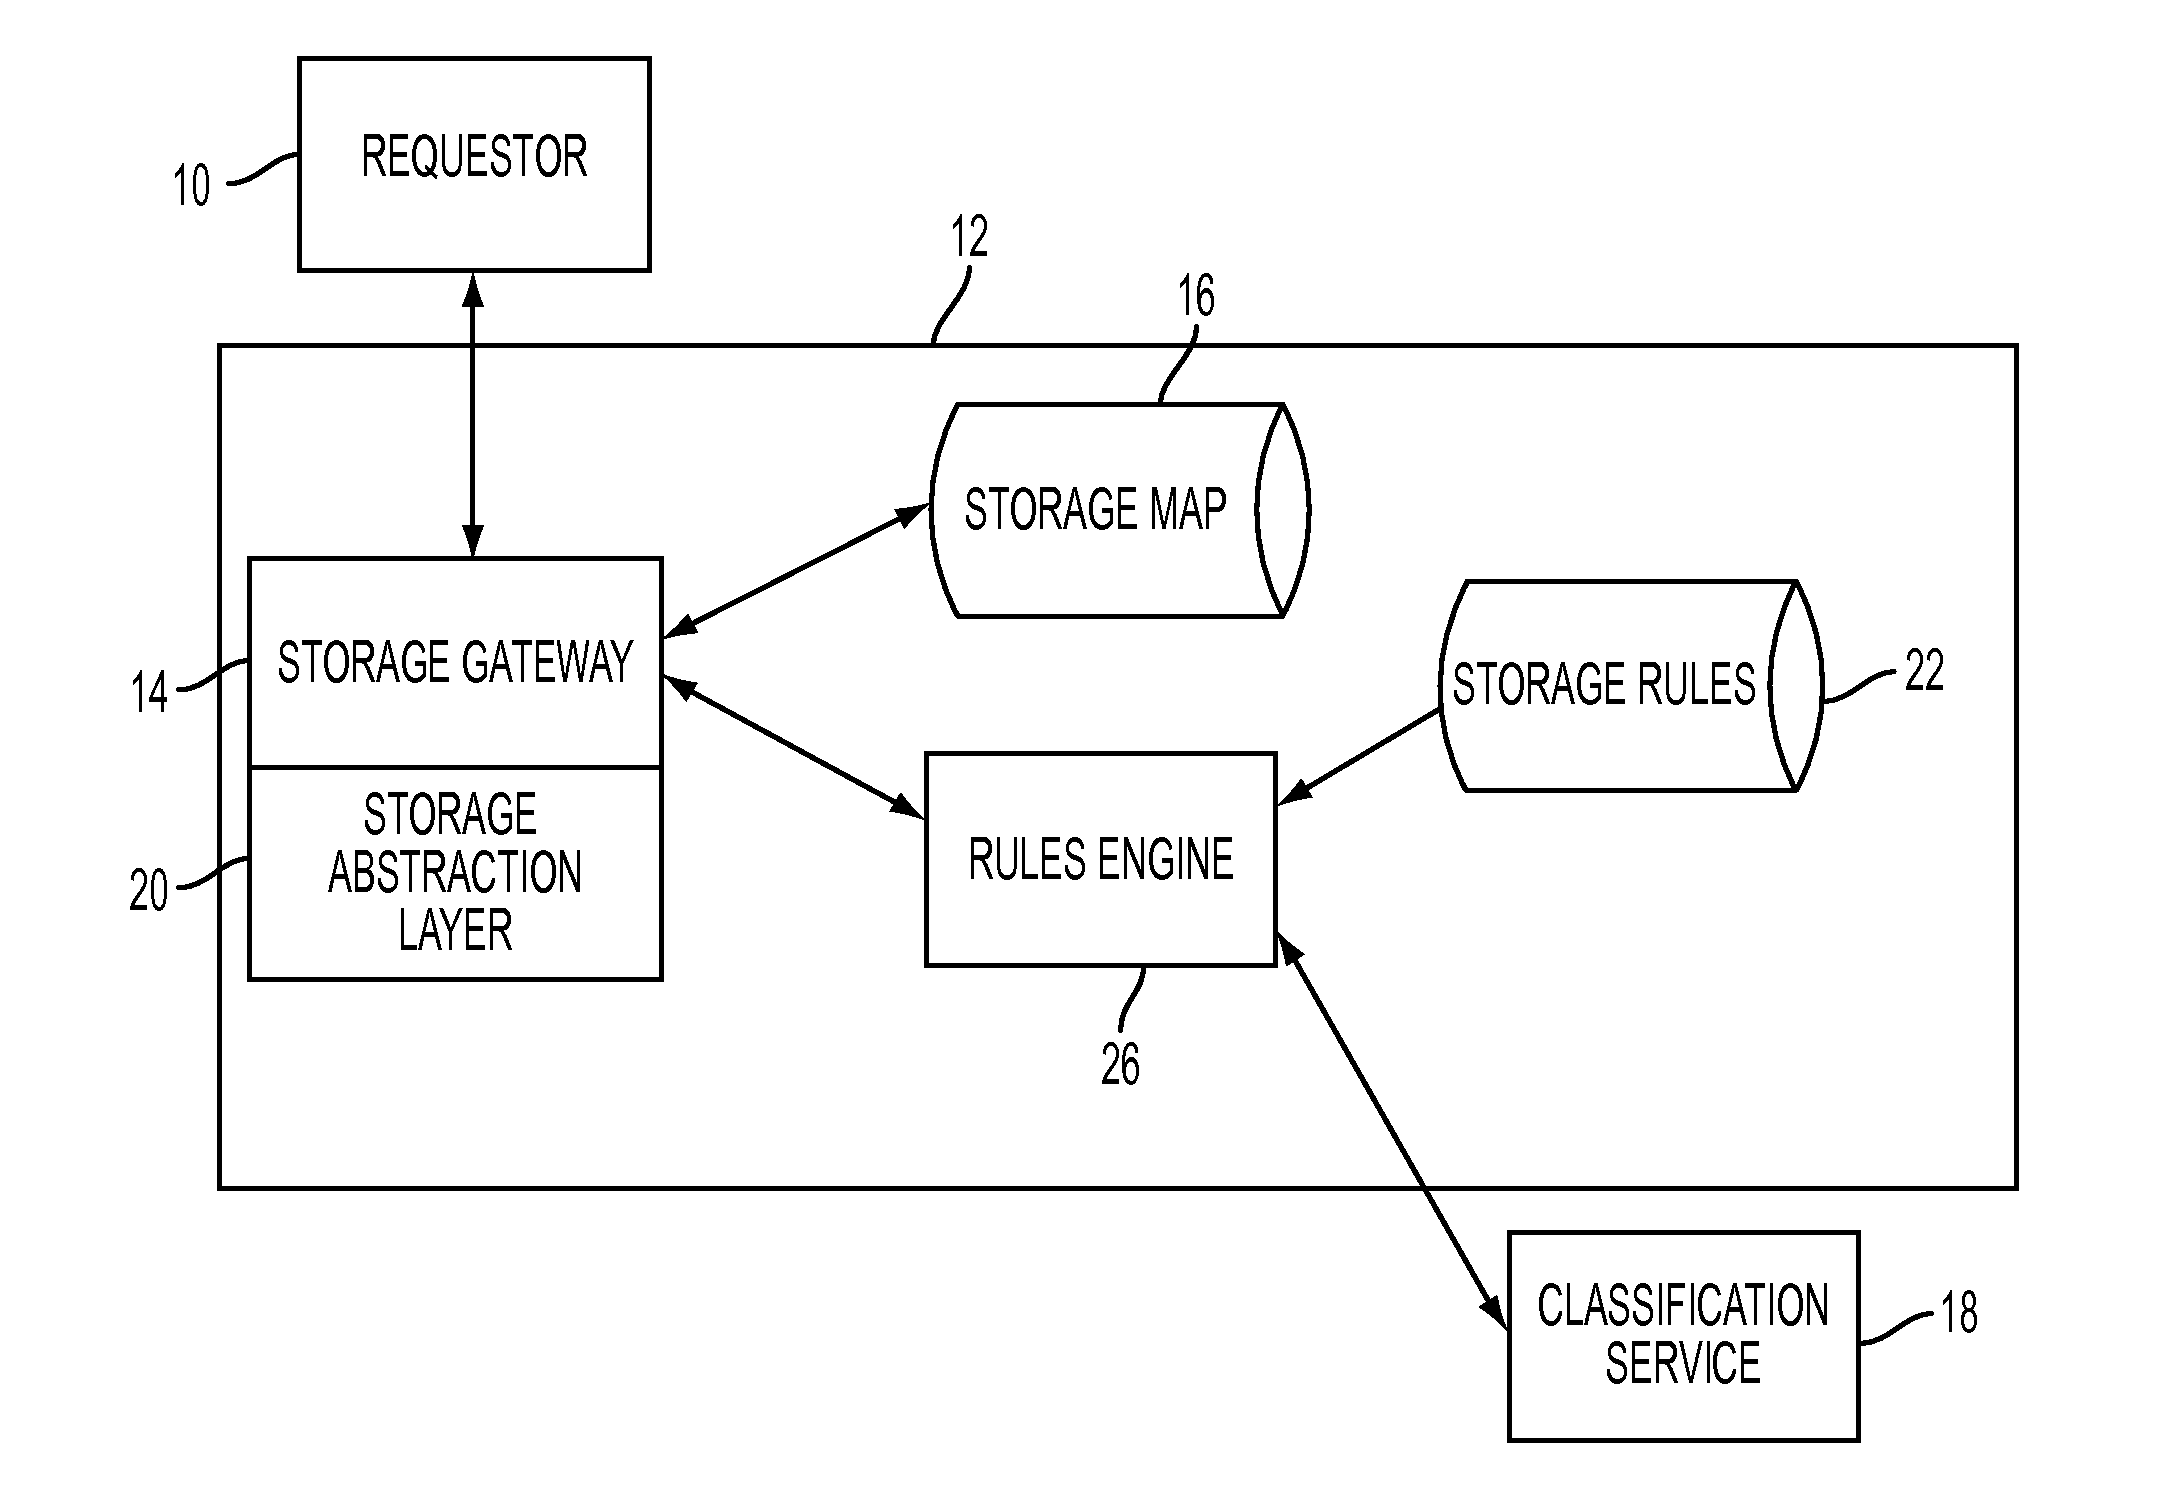 System and method for automatically routing and managing stored documents based on document content